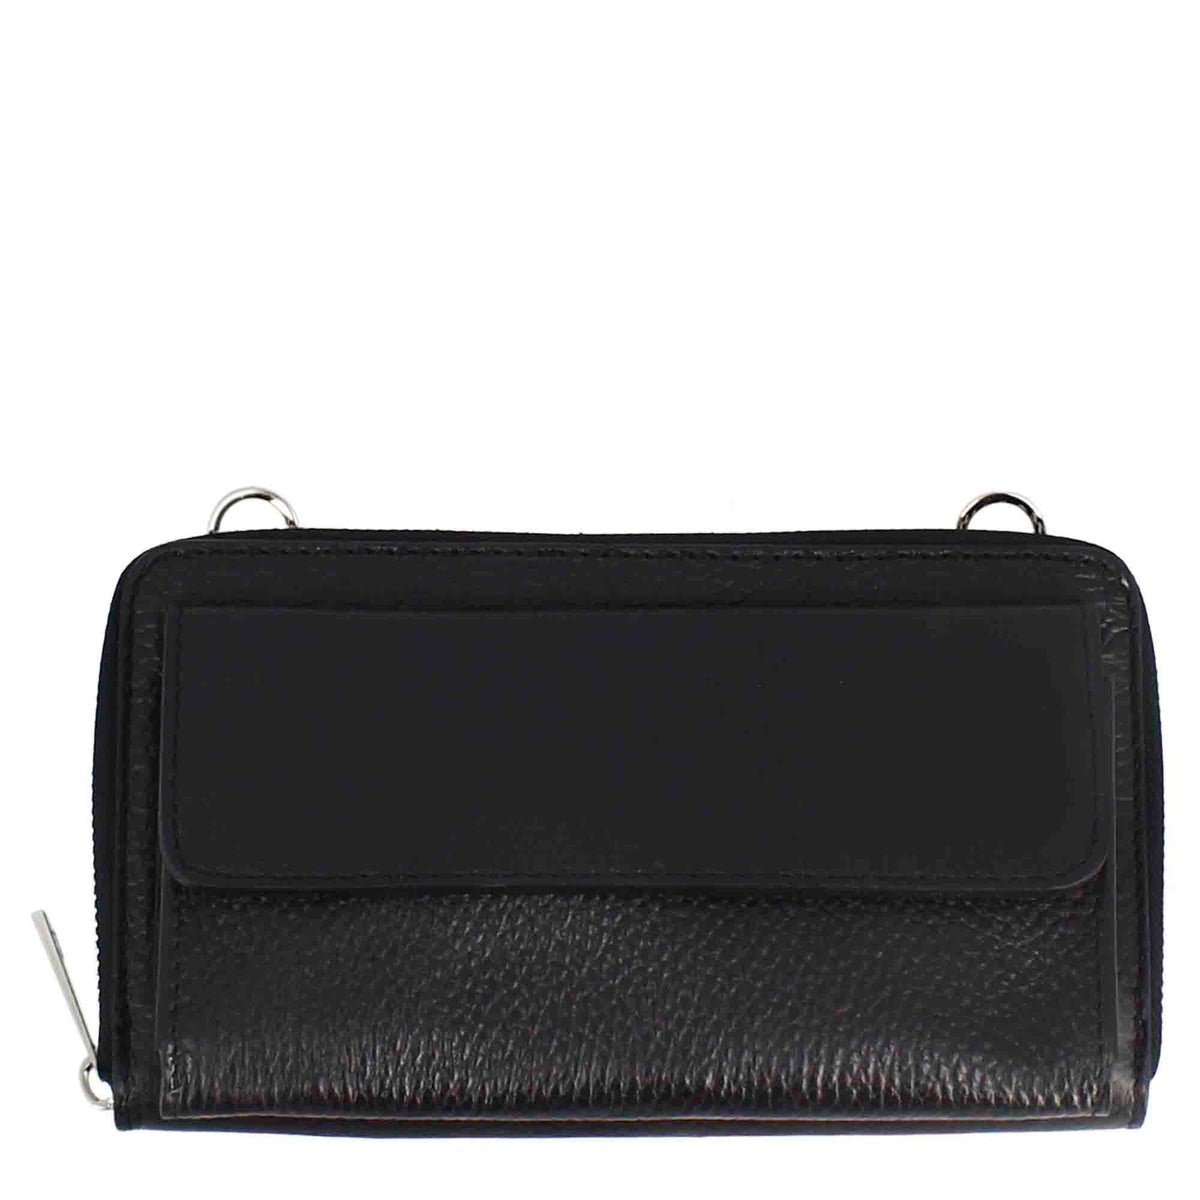 Women's zipped leather wallet purse with pocket